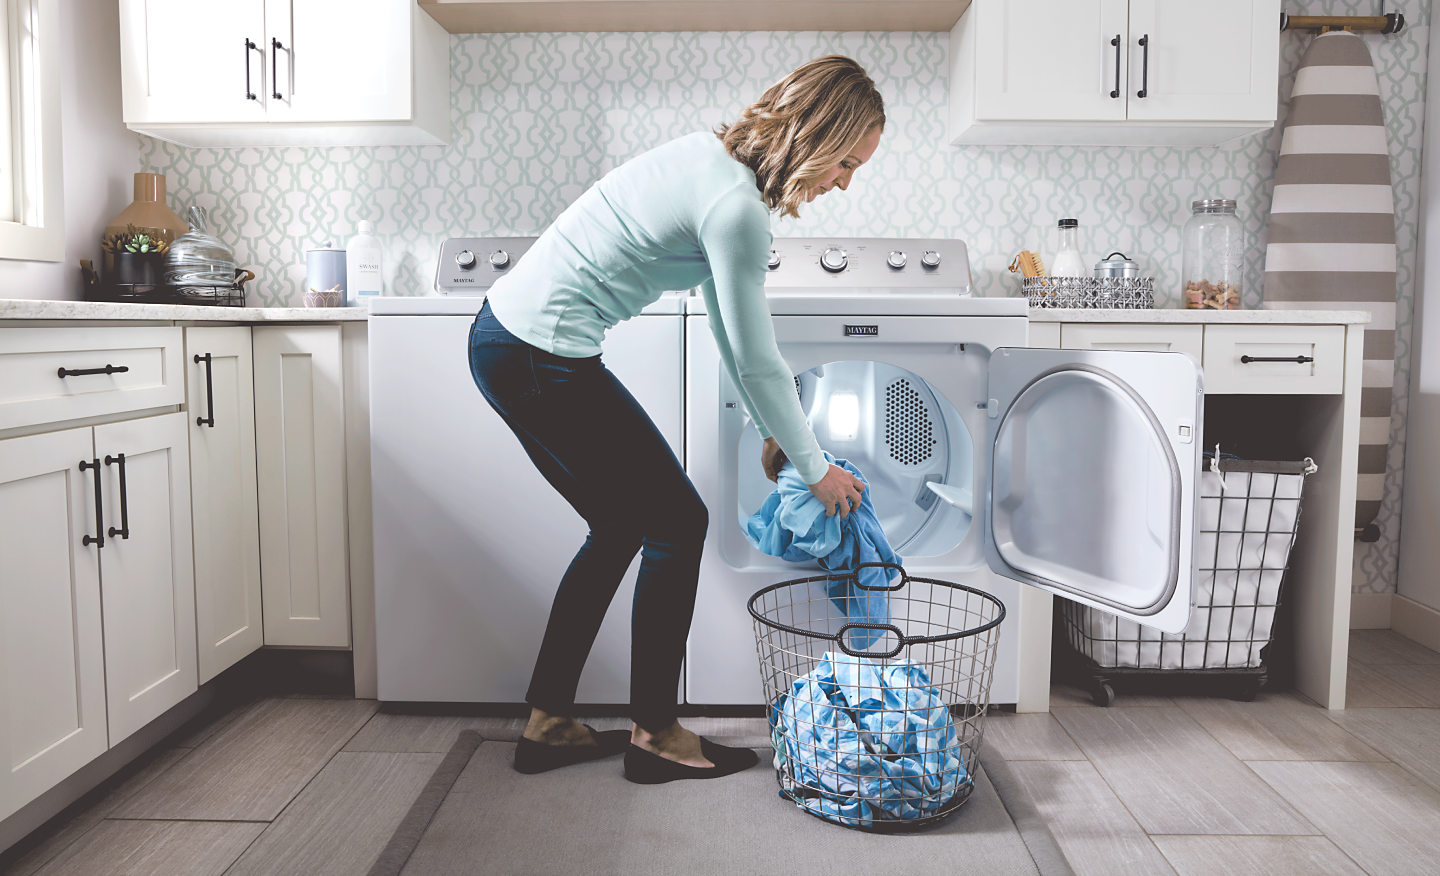 Person transferring items out of a dryer into a basket